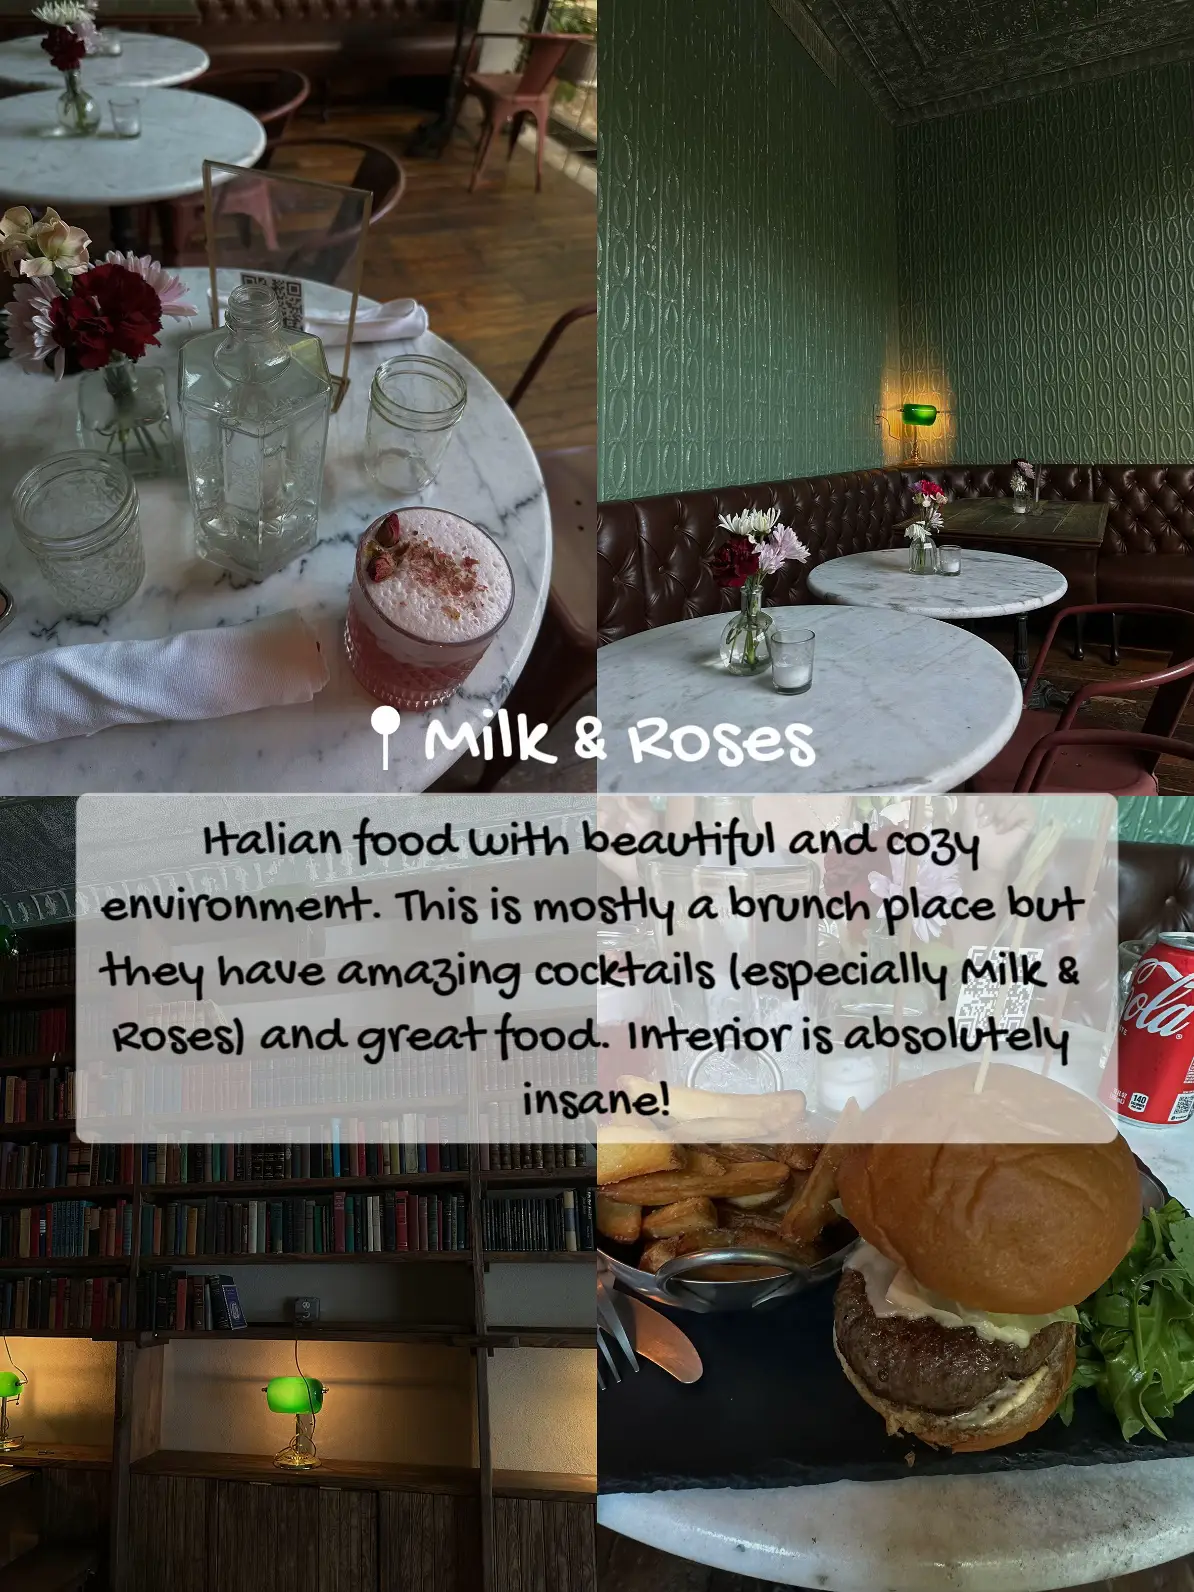  A collage of photos of a restaurant